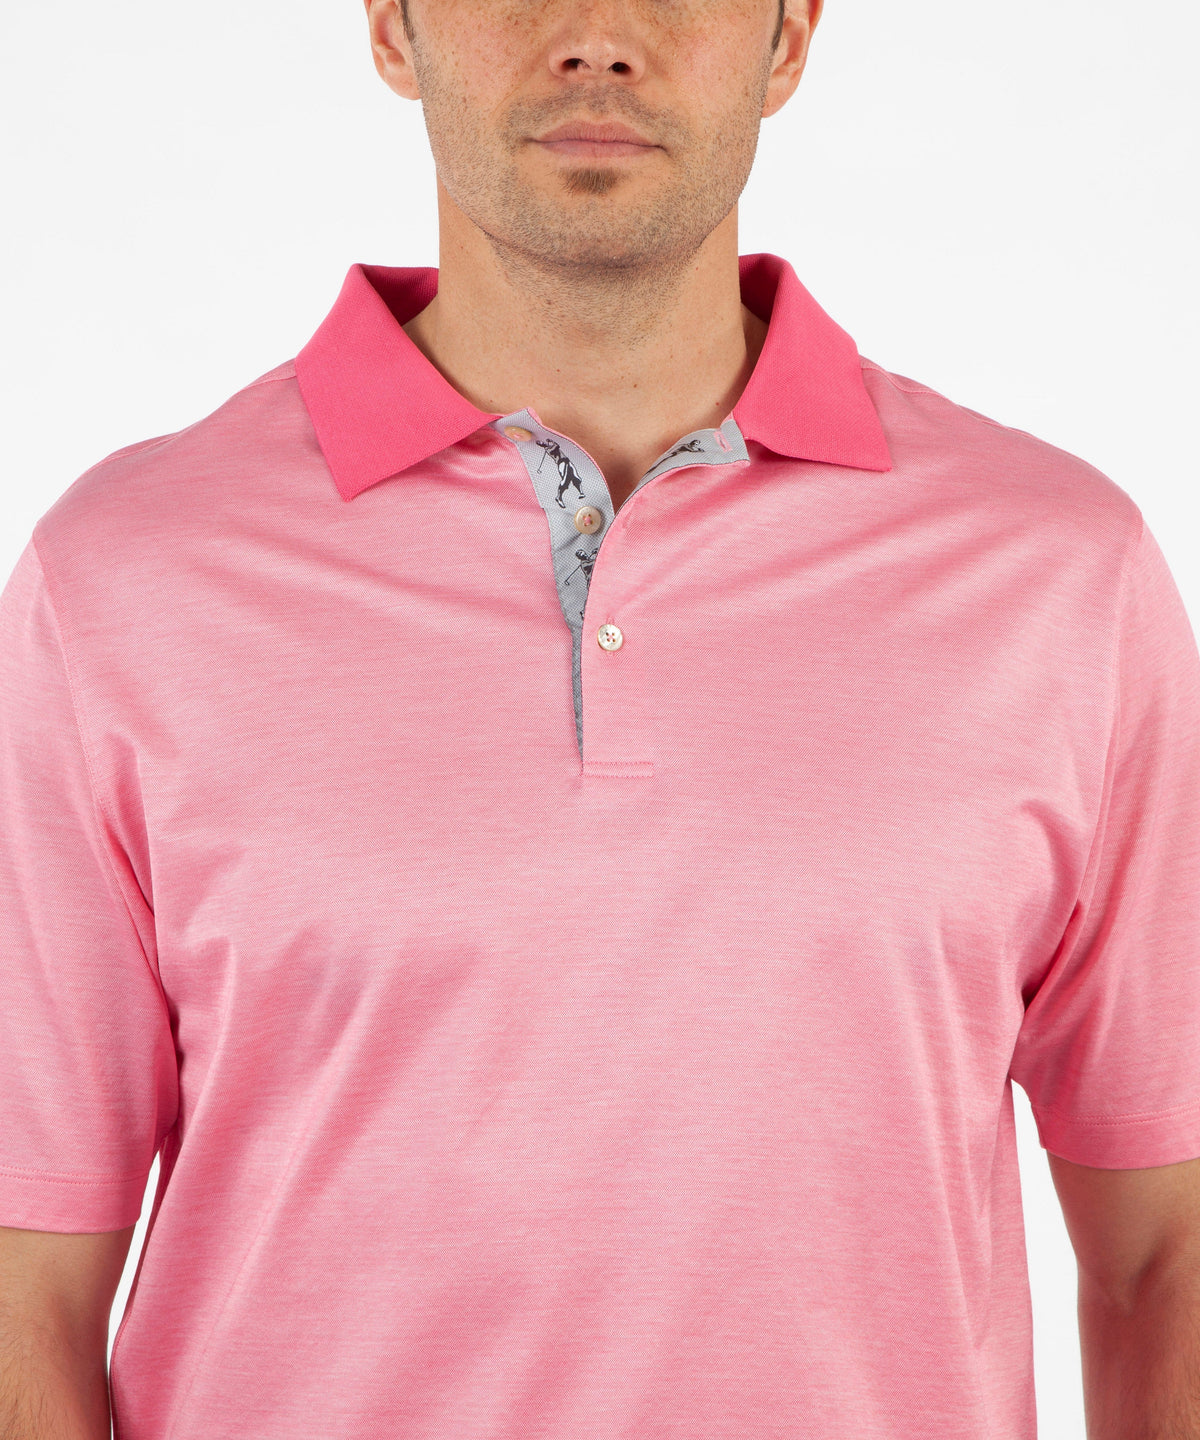 Heritage Luxe 100% Italian Cotton Oxford Solid Polo Shirt